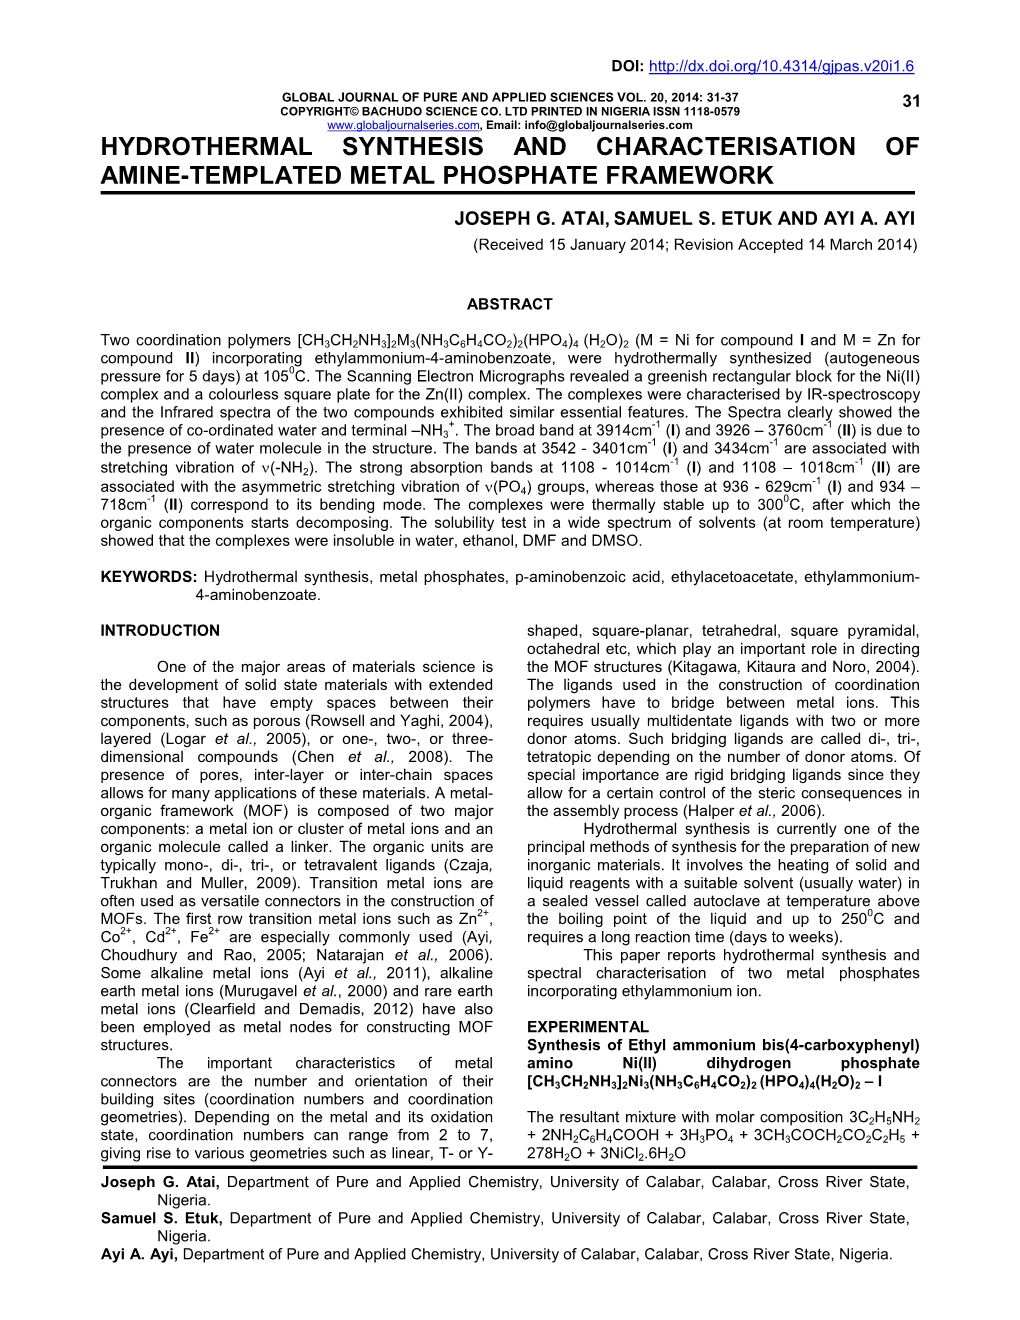 Hydrothermal Synthesis and Characterisation of Amine-Templated Metal Phosphate Framework